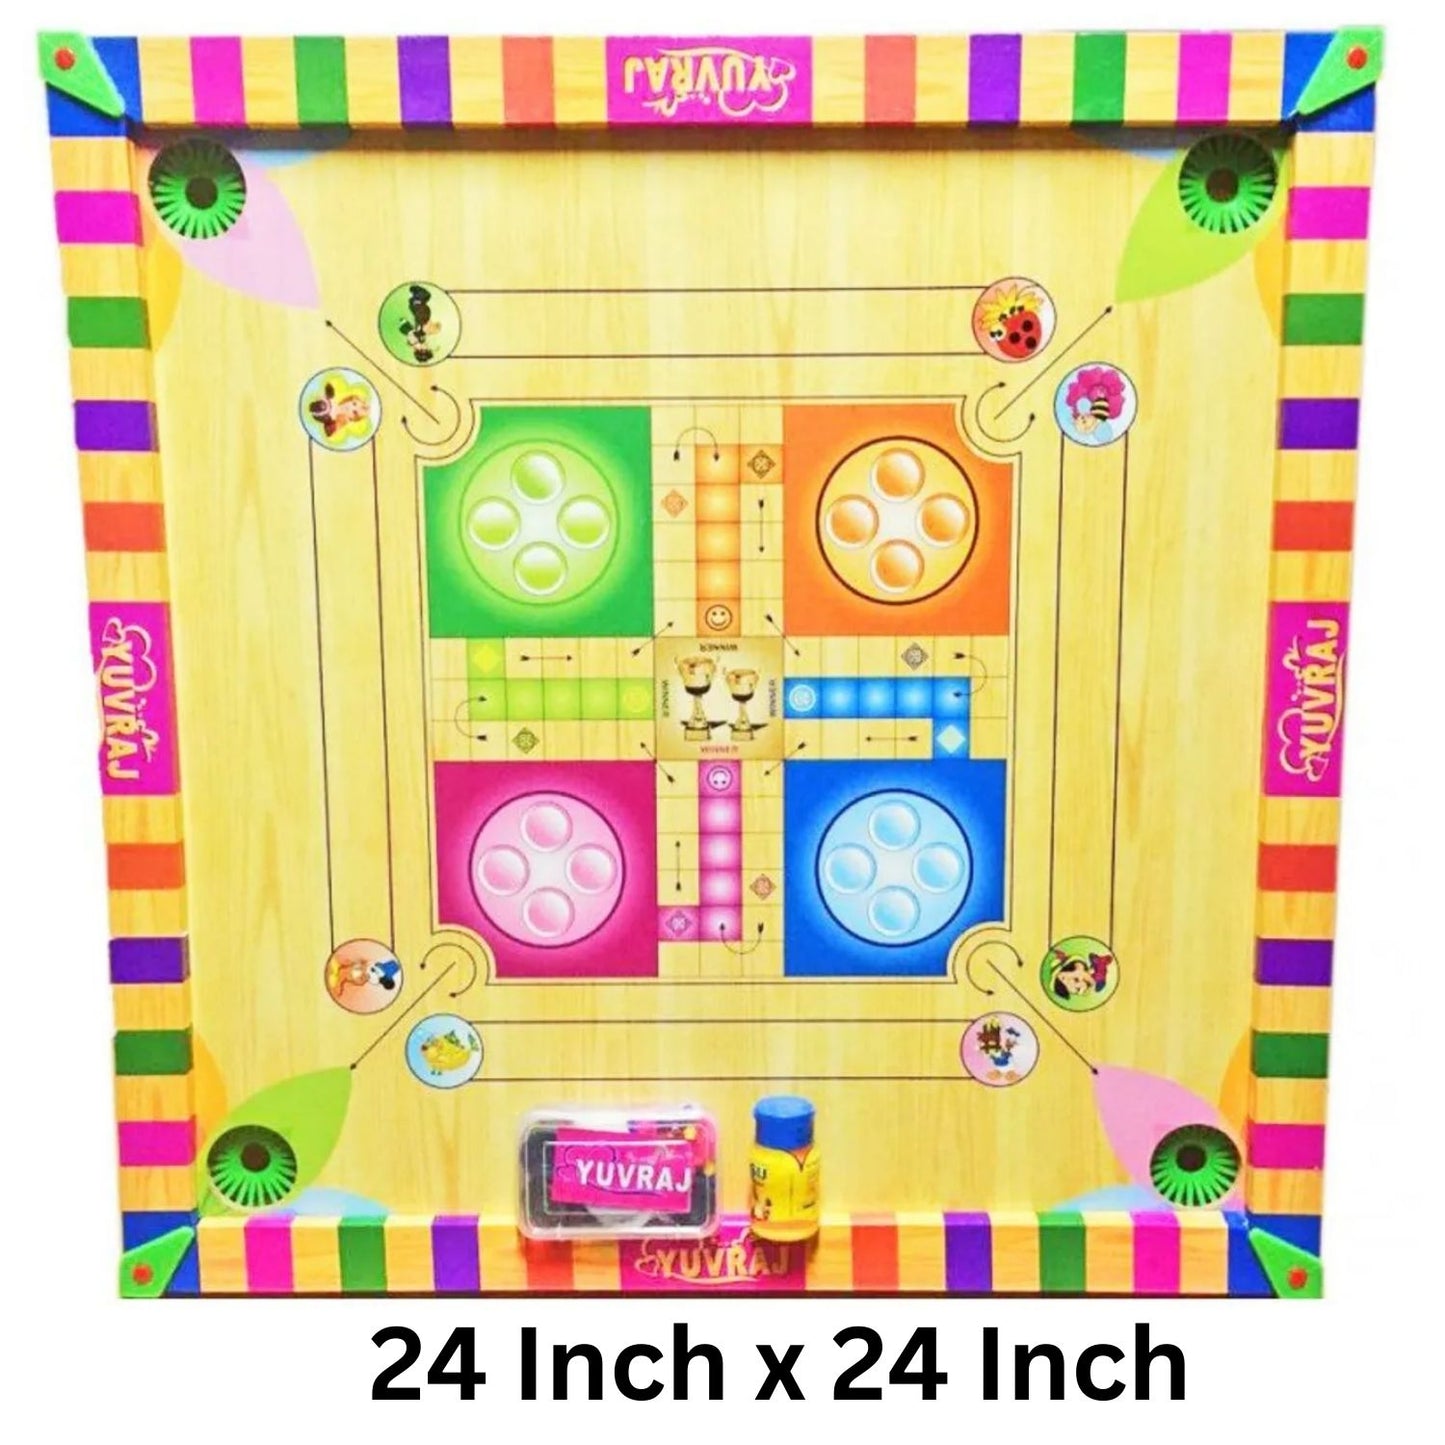 MM TOYS Heavy Coloured Carrom (24x24 Inch) with Dual-Game Feature – Snakes and Ladders Included, Comes with Carrom and Ludo Coins, Multicolor